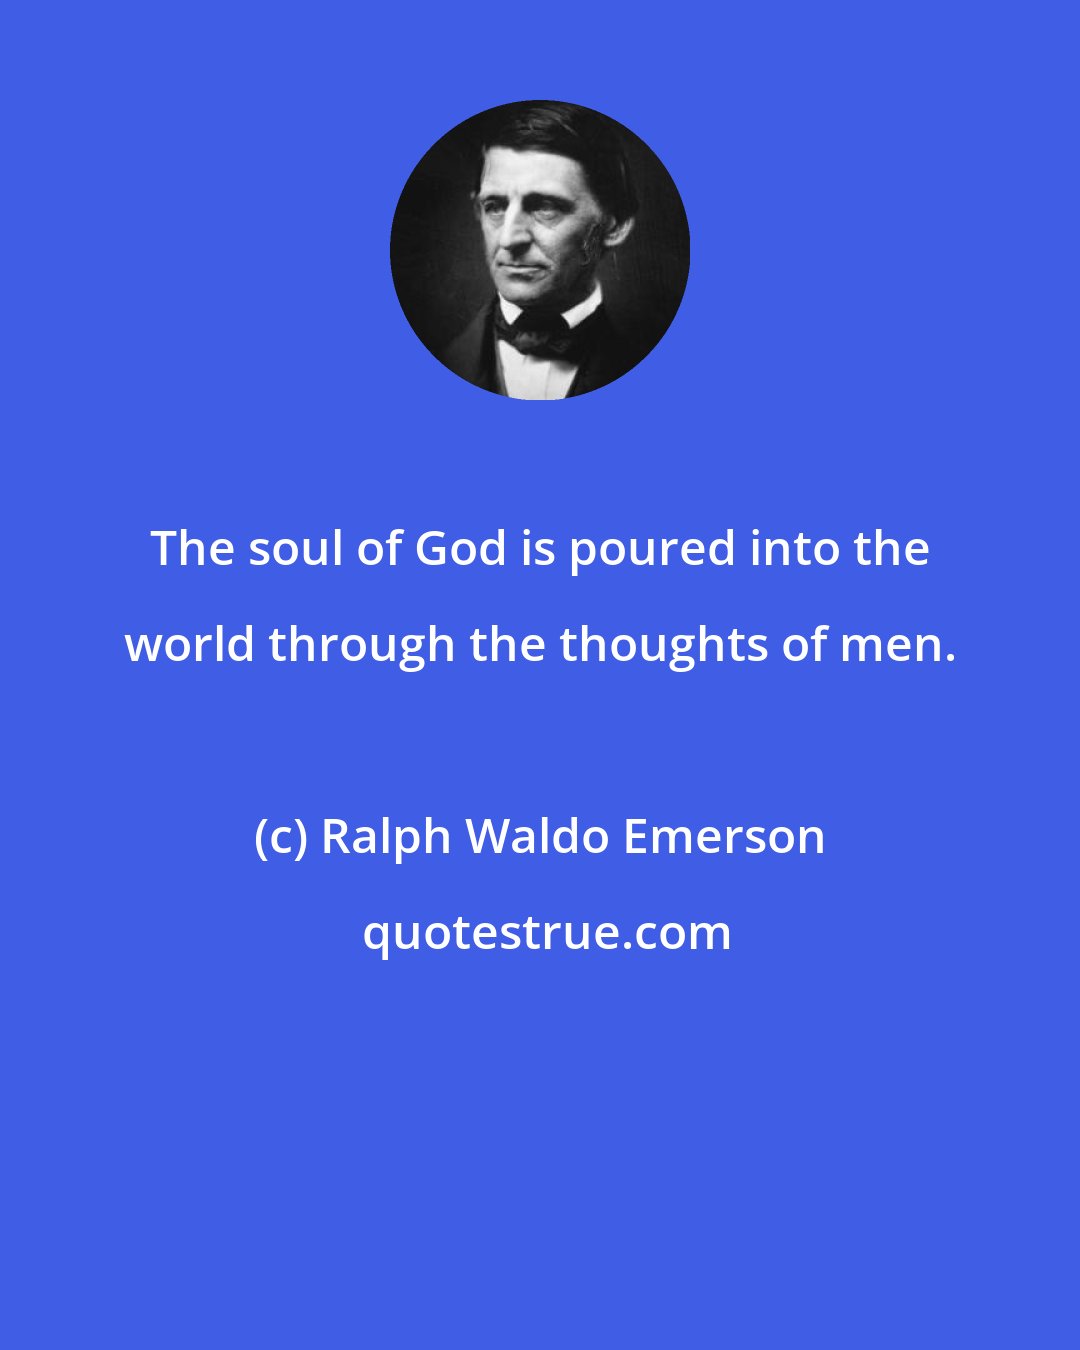 Ralph Waldo Emerson: The soul of God is poured into the world through the thoughts of men.